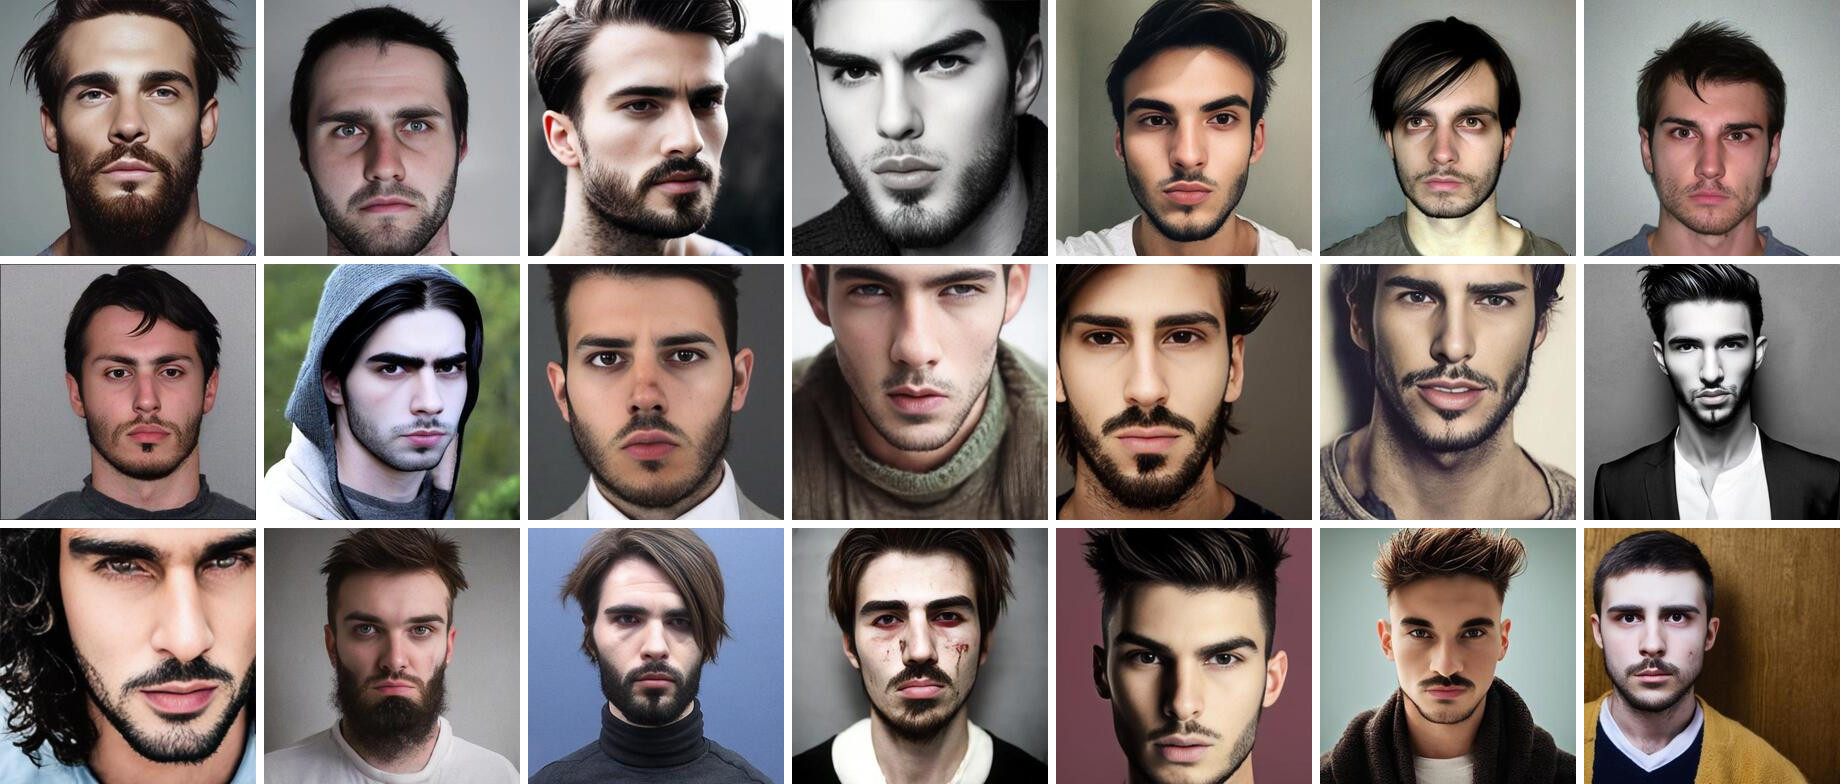 Grid of male faces generated by AI